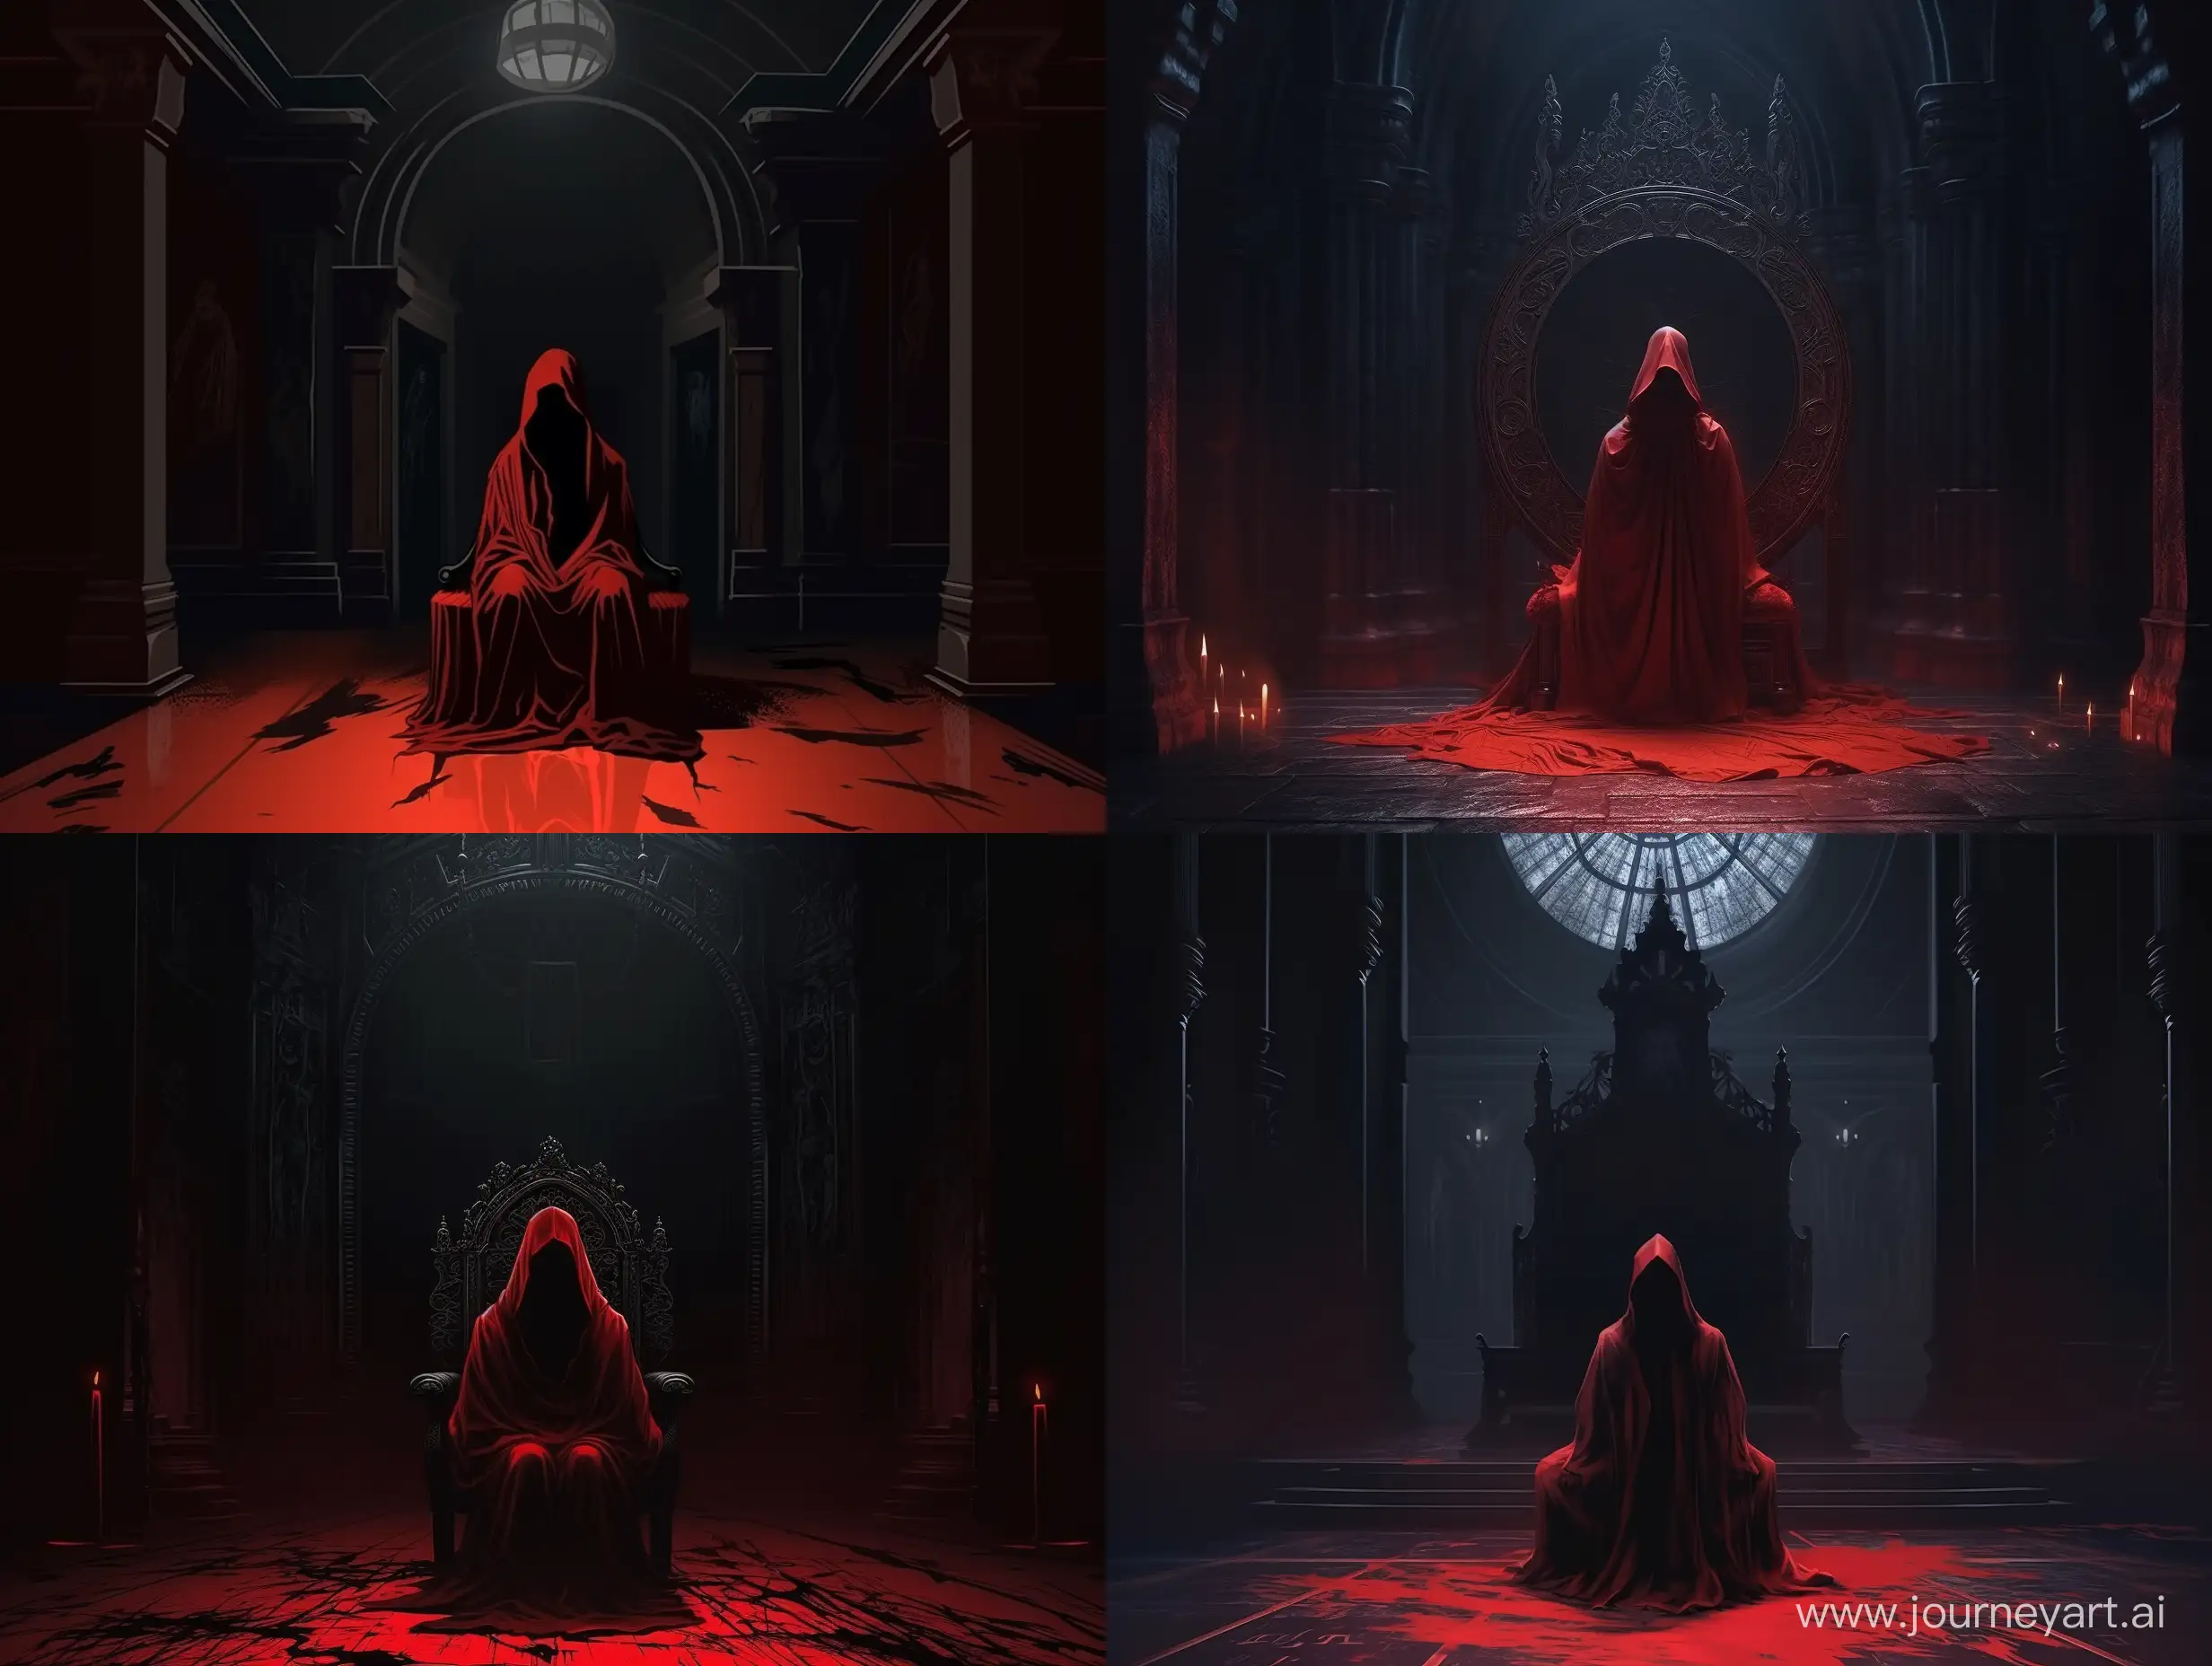 Illustration like a fairytale of someone in a red cloak with a hood sits on a throne in an empty dark hall without windows